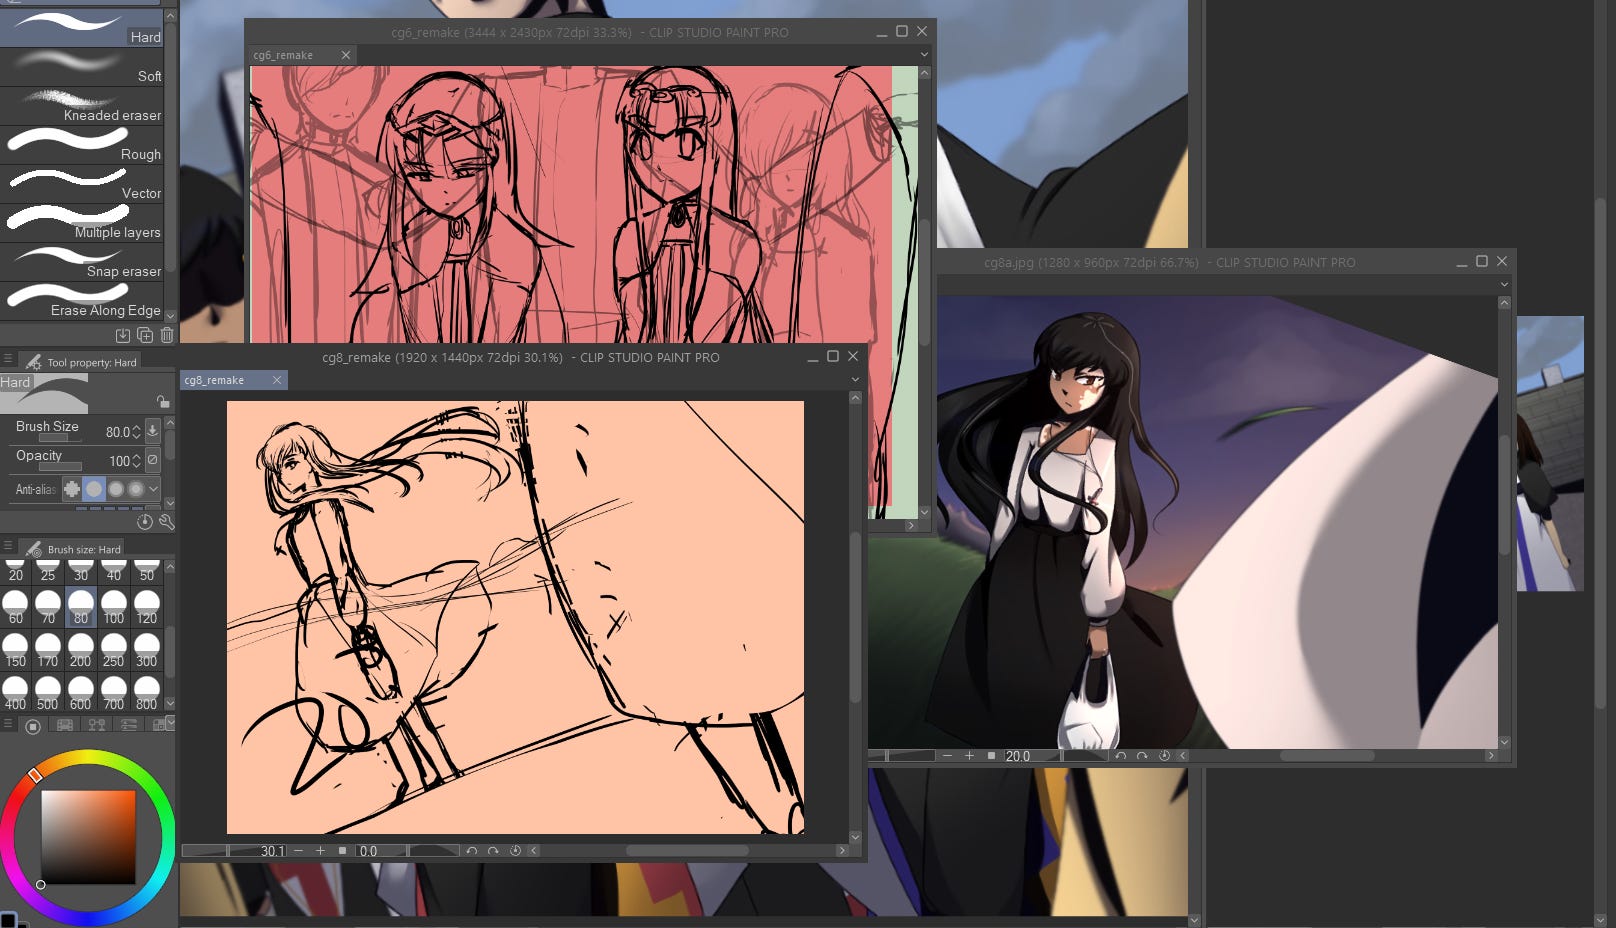 a variety of work in progress cgs and their original versions